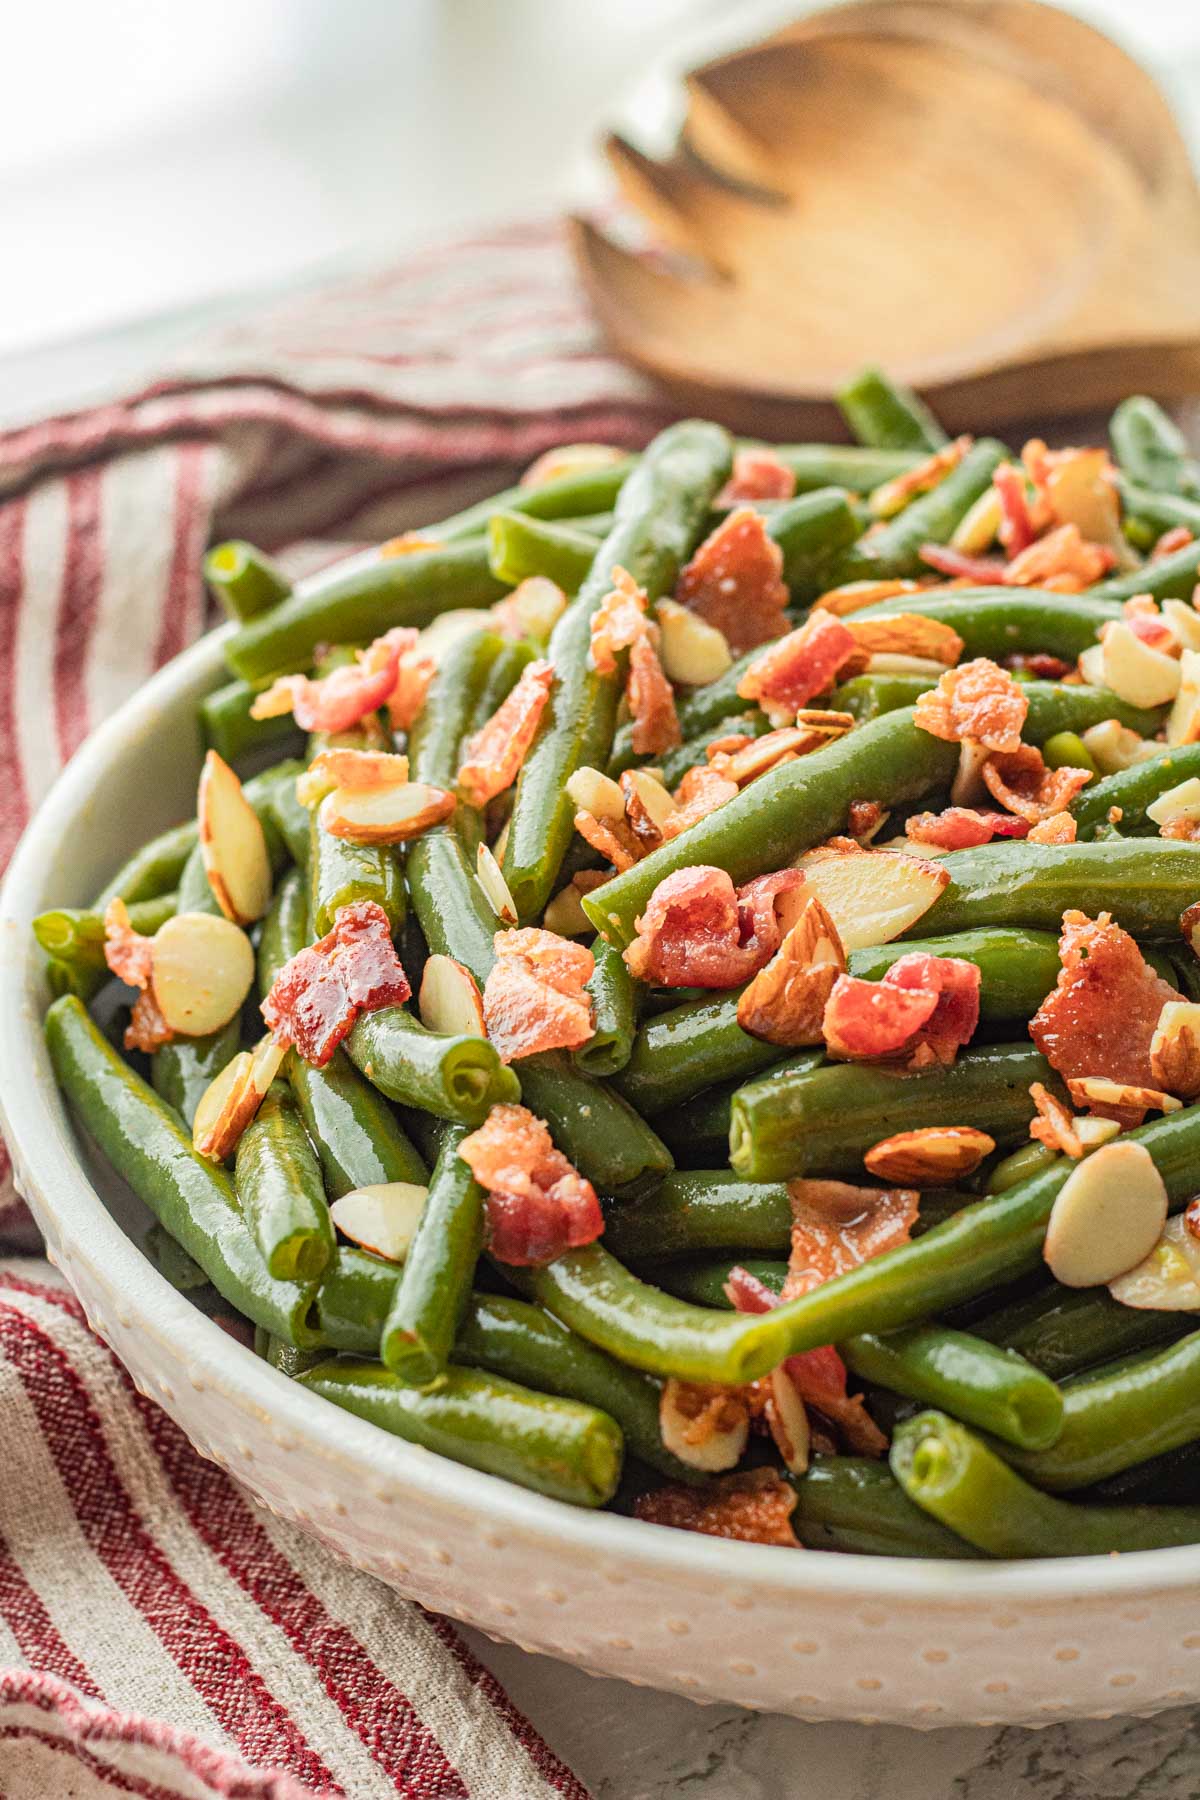 https://iwashyoudry.com/wp-content/uploads/2023/11/Southern-Style-Green-Beans-Cooked-4-.jpg